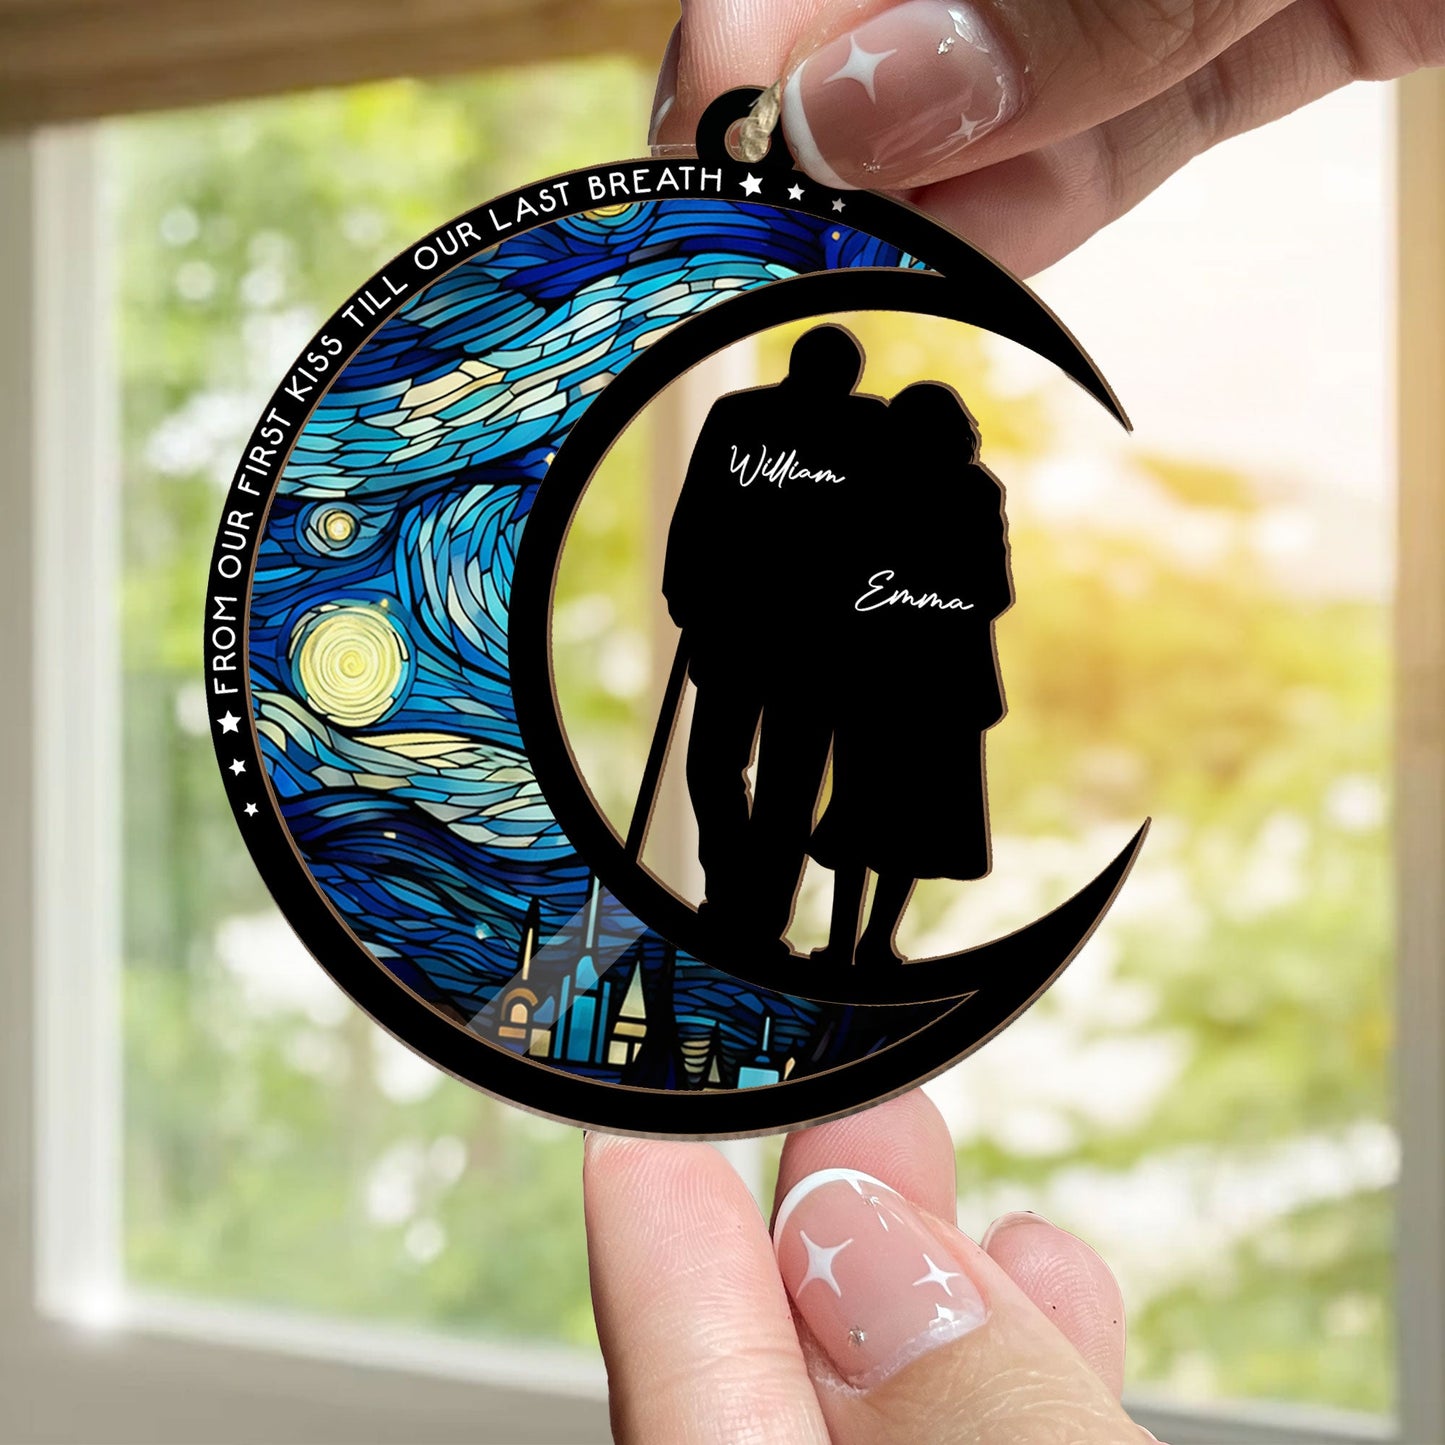 From Our First Kiss Till Our Last Breath - Personalized Suncatcher Ornament